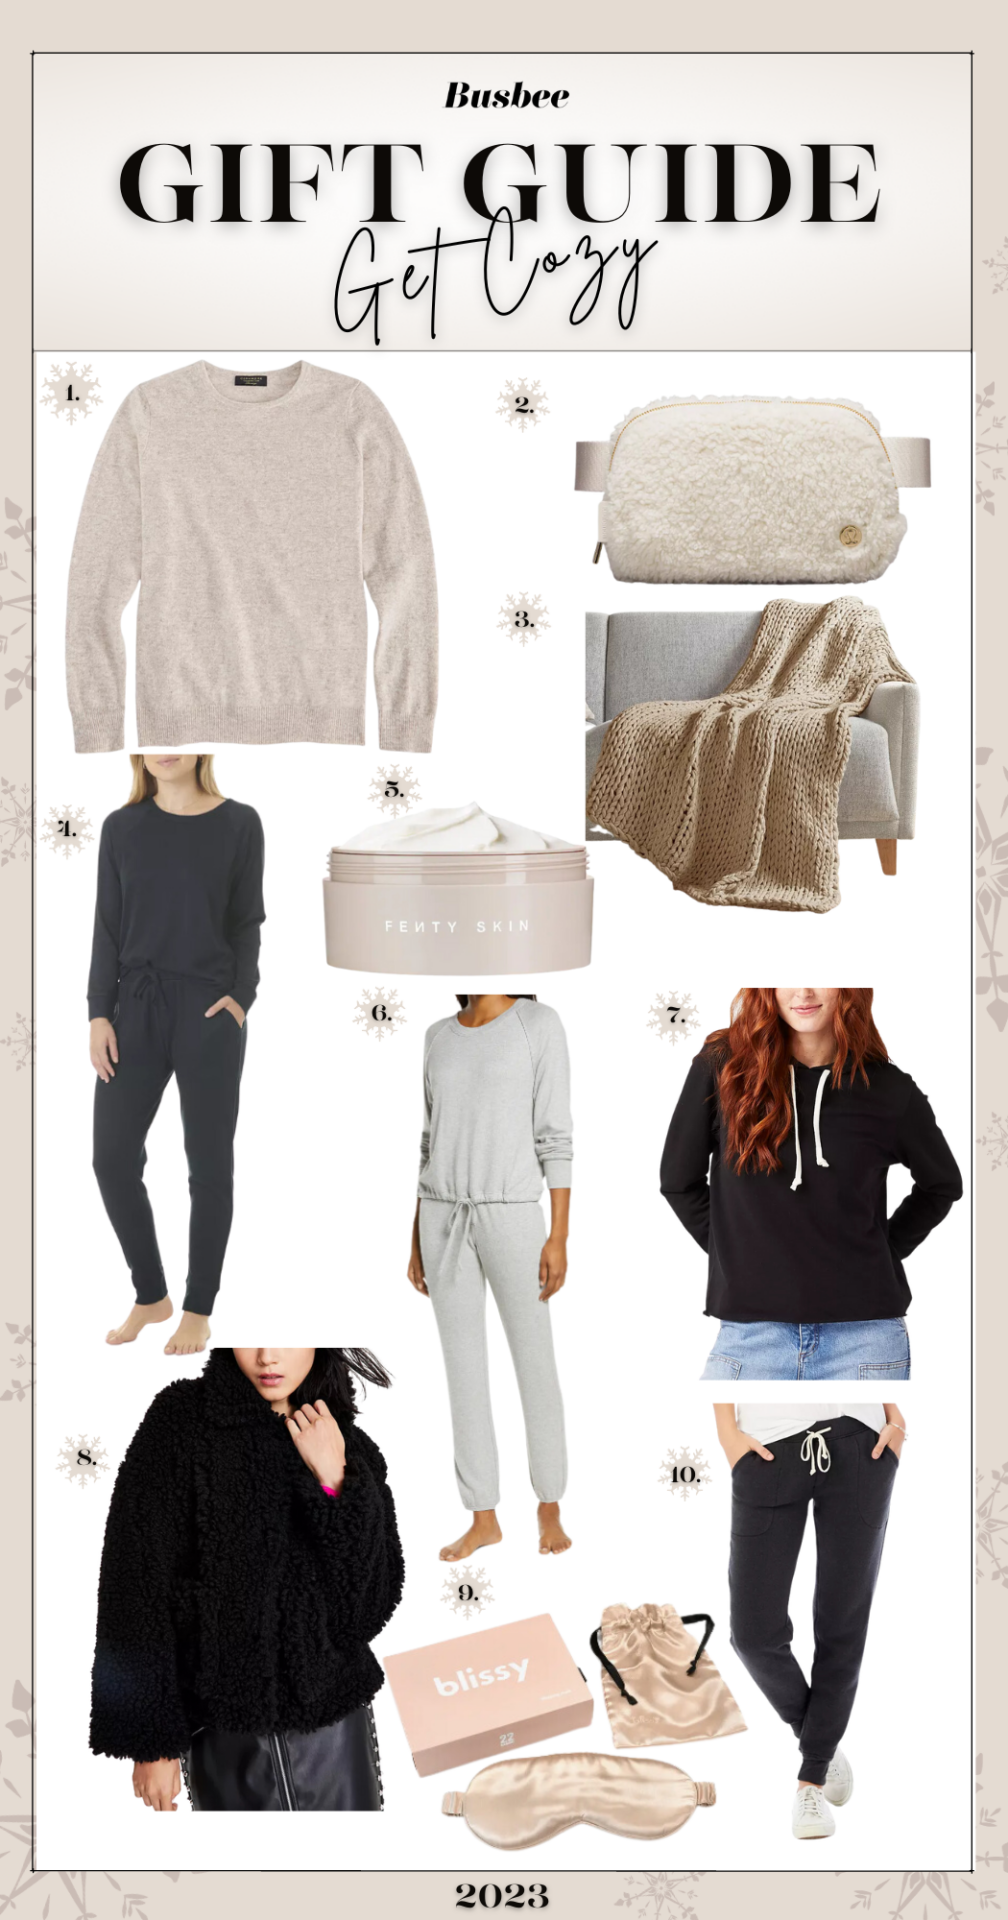 Busbee cozy gift guide